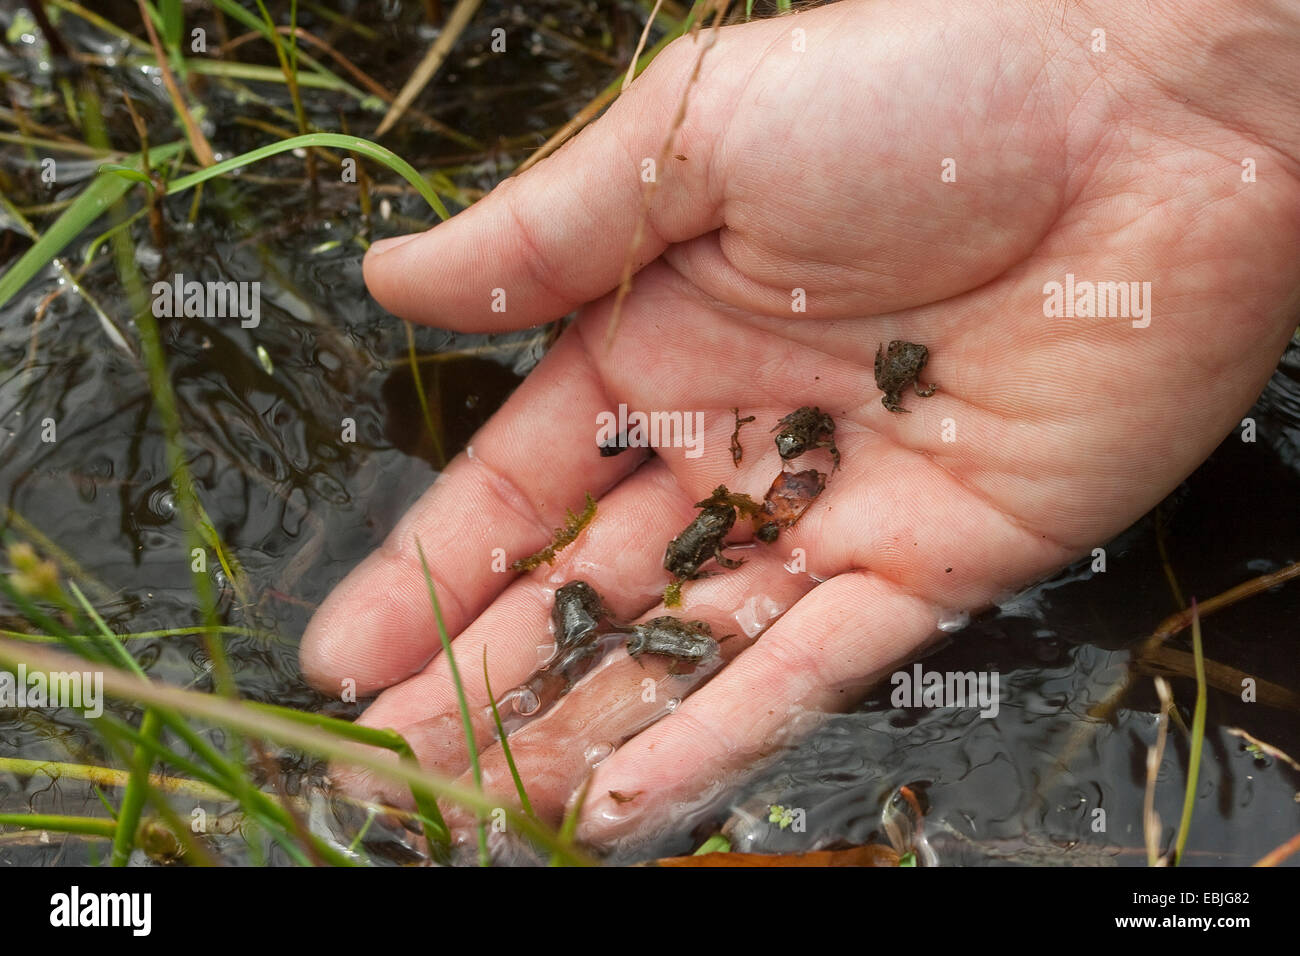 Green toad, Variegated toad (Bufo viridis), young toads being released into a wetland by a biologist as part of an amphibian protection program Stock Photo